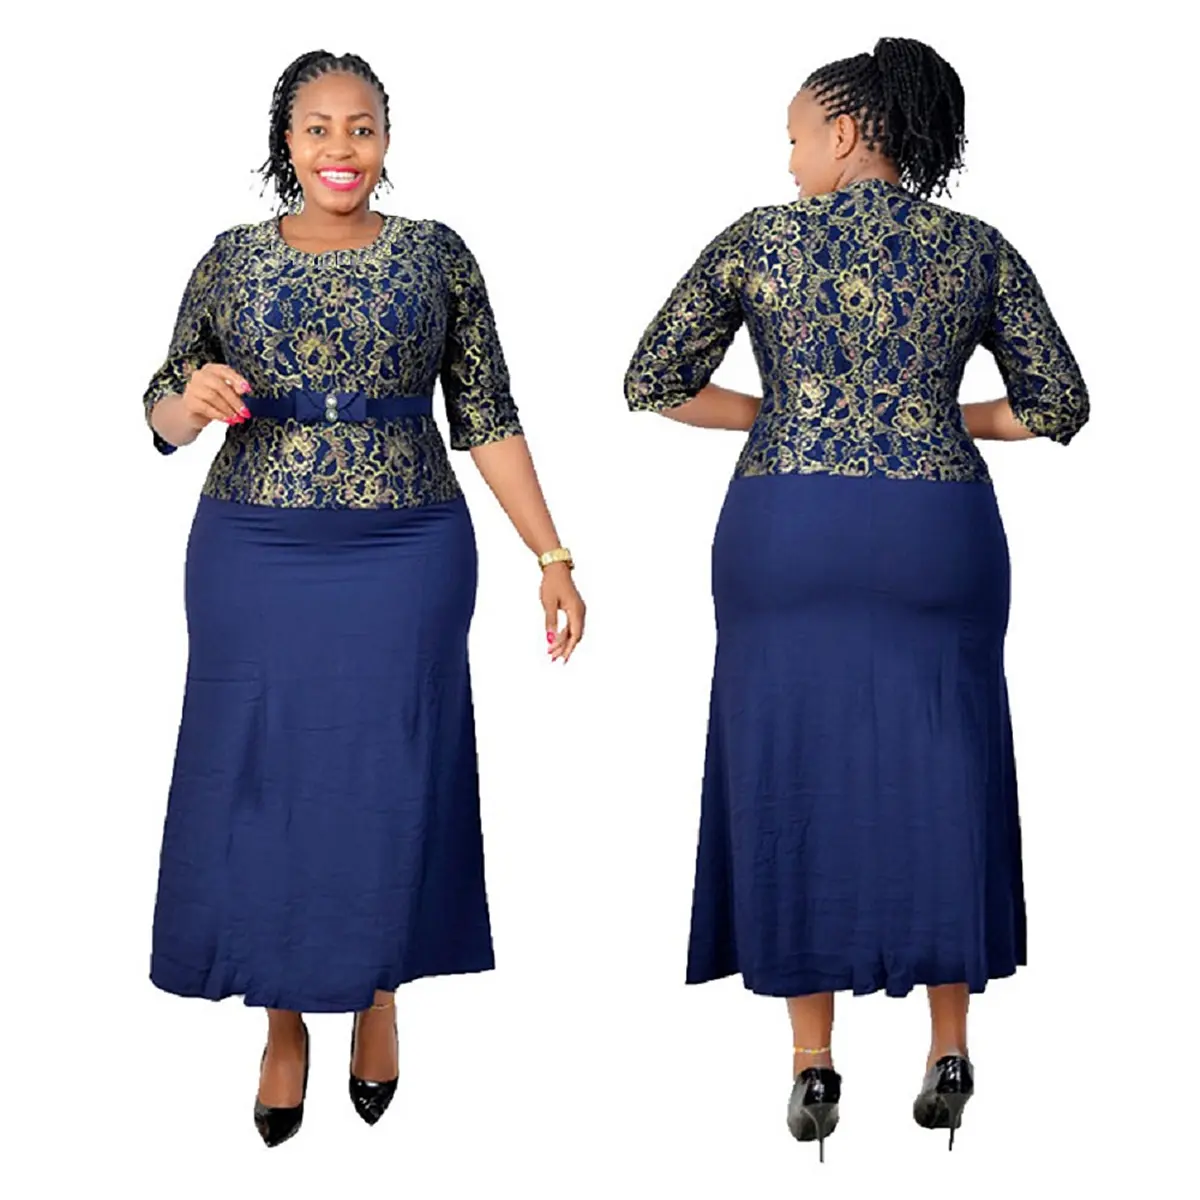 Lace style african ladies dresses for wedding church from turkey ladies elegant